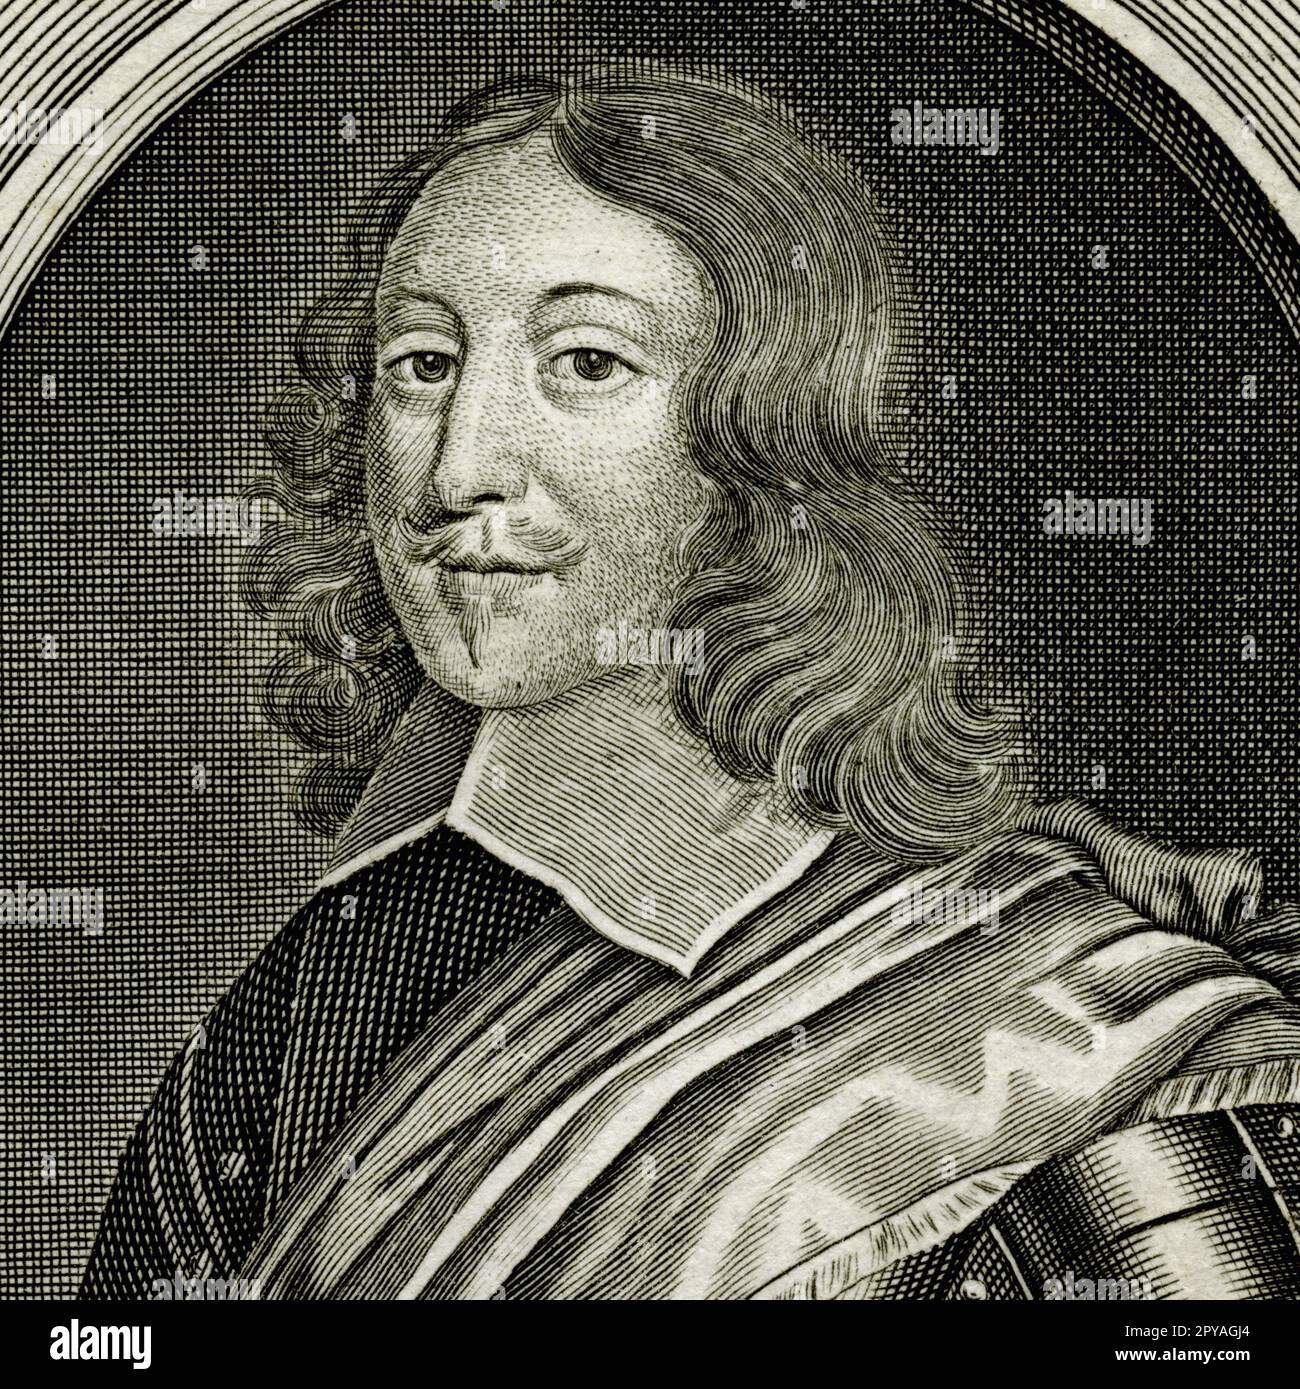 Nathaniel Fiennes (1608 - 1669), Member of the English Parliament for Banbury in Oxfordshire and a Puritan who fought for Parliament in the English Civil War.  He was condemned to death in 1643 for surrendering Bristol to the King's nephew, Prince Rupert, but exonerated by Oliver Cromwell and other Parliamentary generals.  Square detail of engraving created in the 1700s by Flemish engraver, Michael van der Gucht (1660-1725). Stock Photo